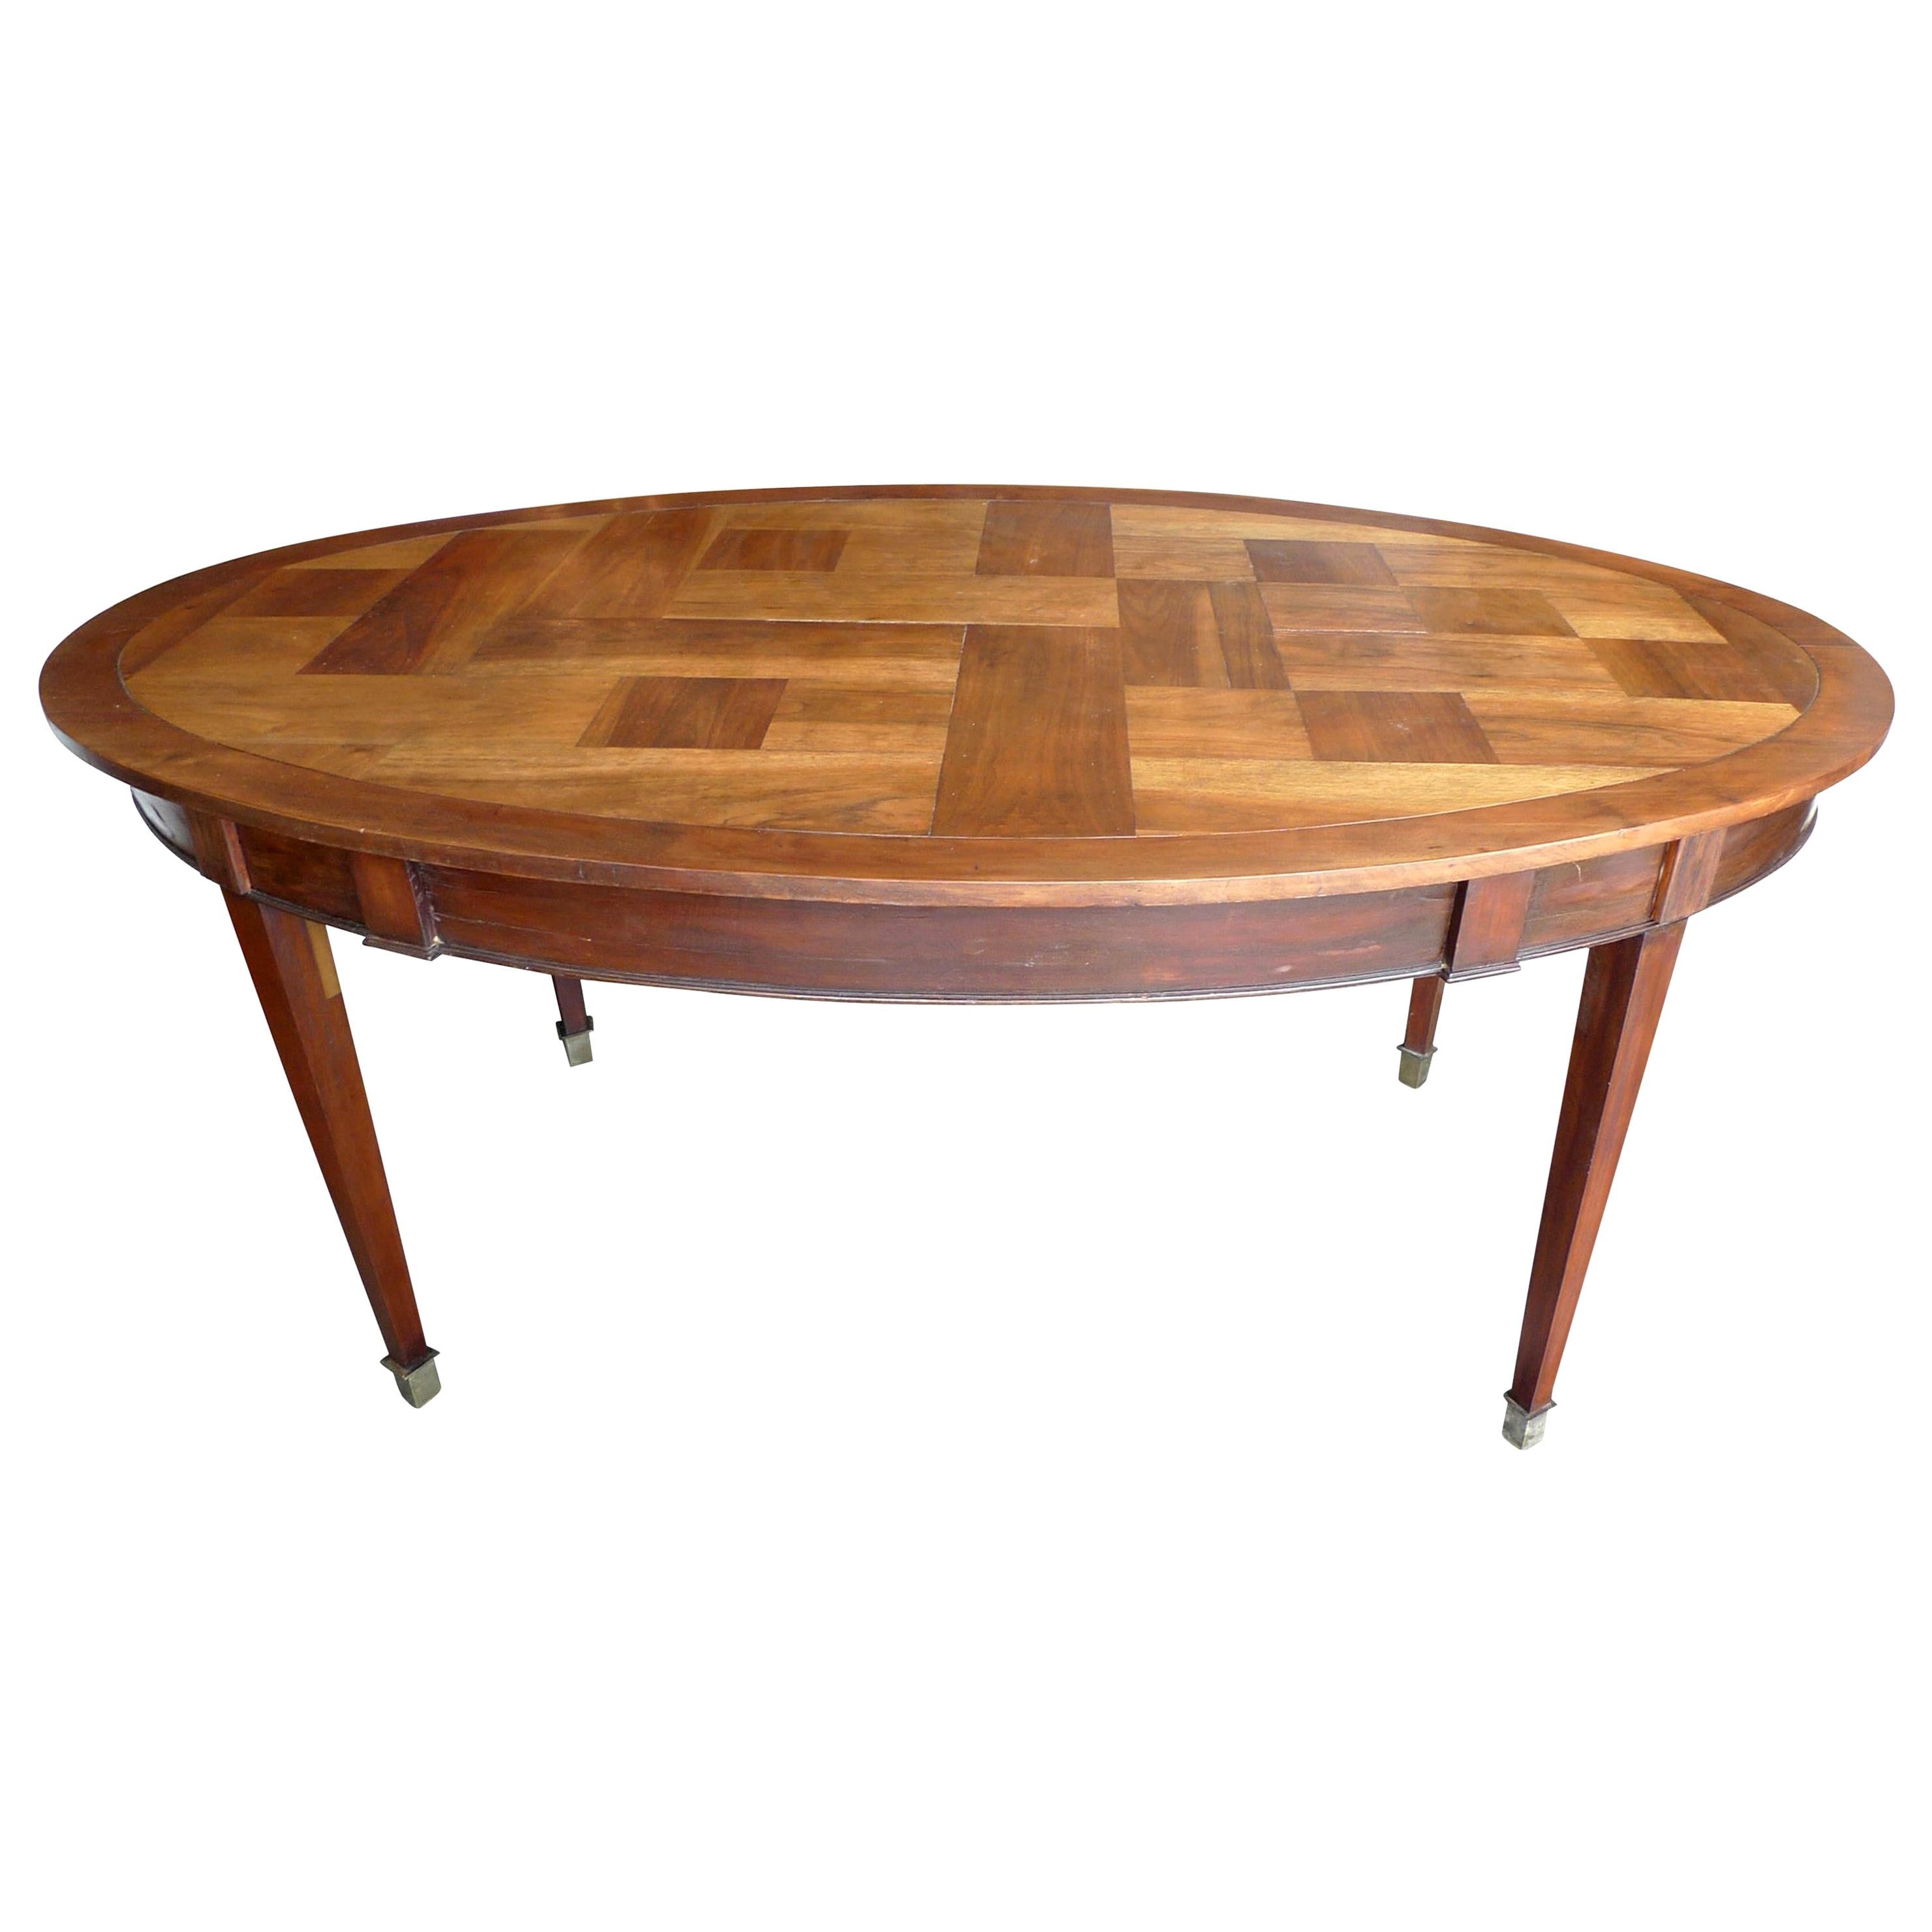 French 19th Century Oval Mahogany Dining Table with Walnut Parquetry Top